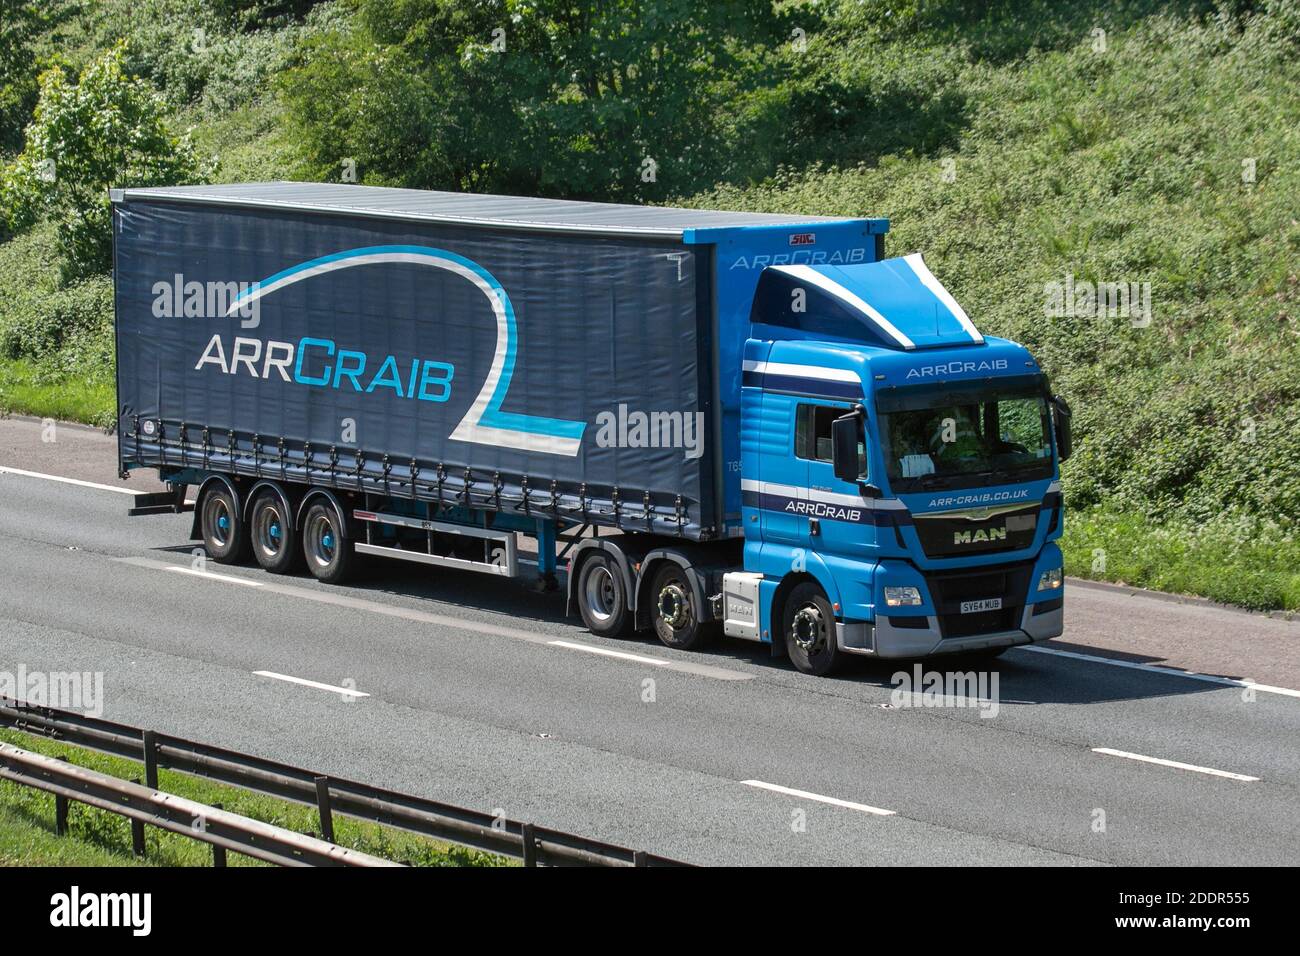 ArrCraib Haulage delivery trucks, lorry, heavy-duty vehicles, transportation, blue truck, cargo carrier, MAN vehicle, European commercial transport industry HGV, M6 at Manchester, UK Stock Photo